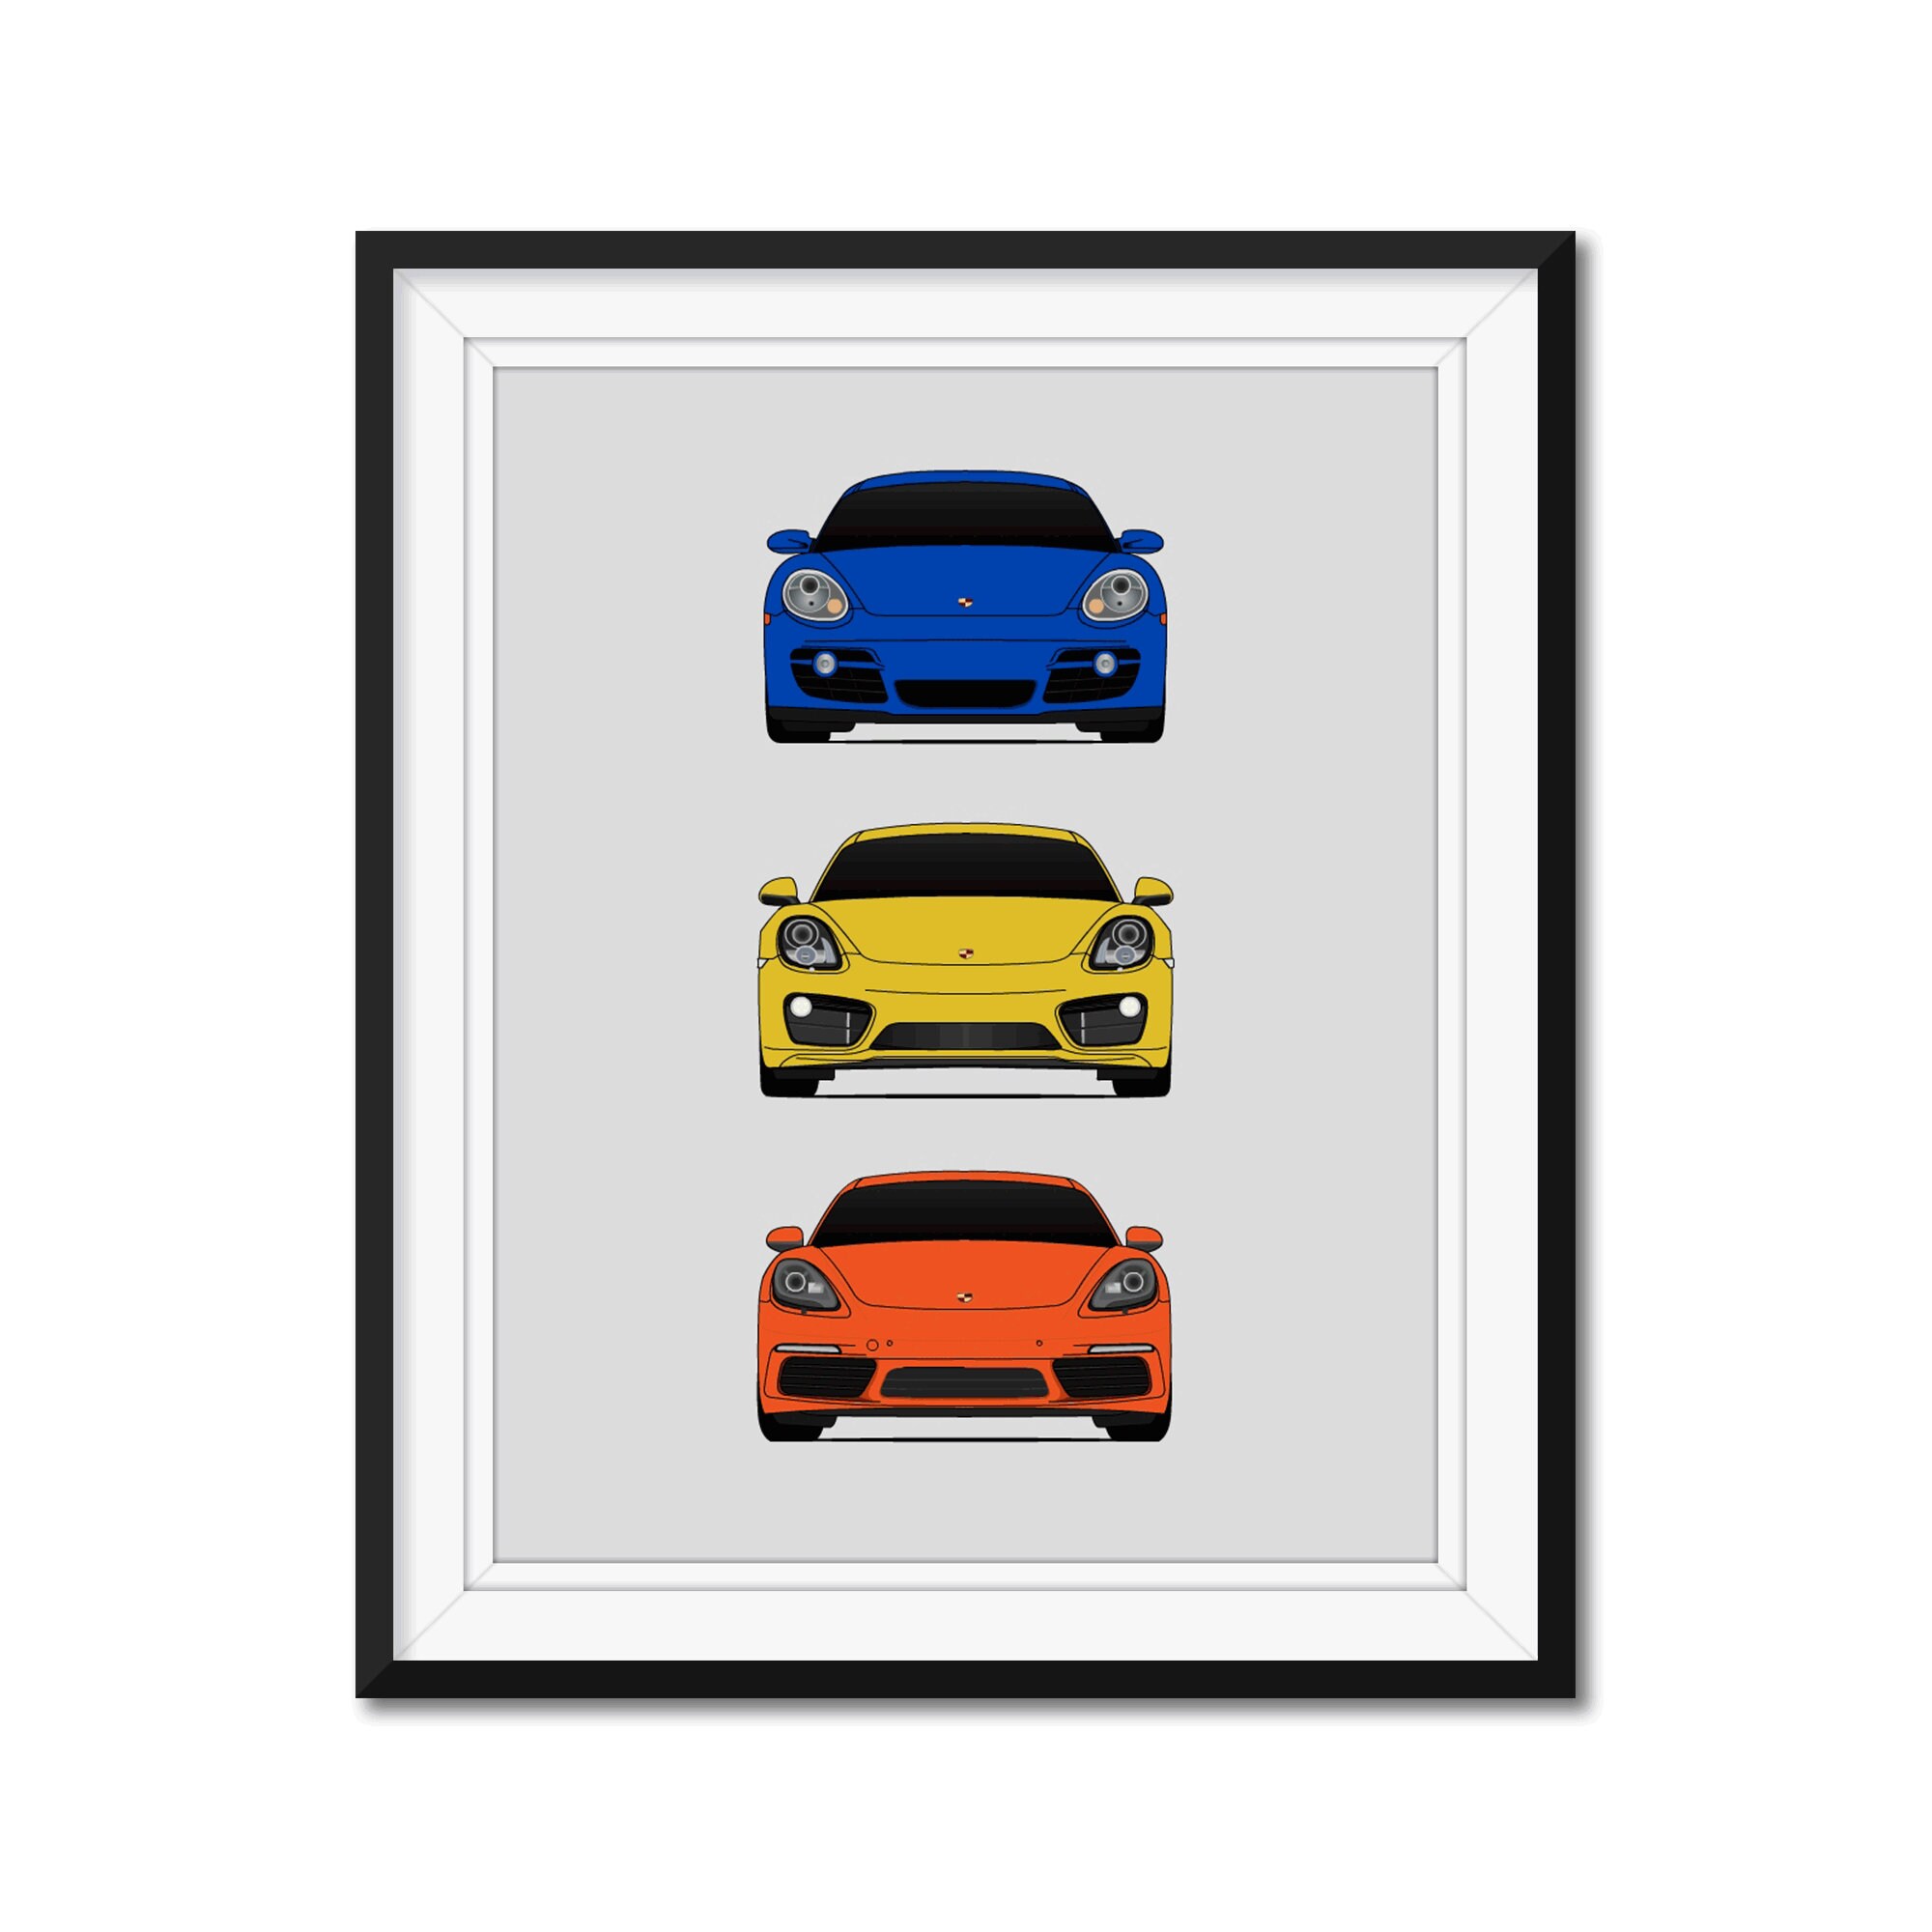 AX1 Car Models: Cayman 718 Cayman 981 Cayman 987 Porsche Cayman S Poster Print Wall Art of the History and Evolution of Cayman Generations